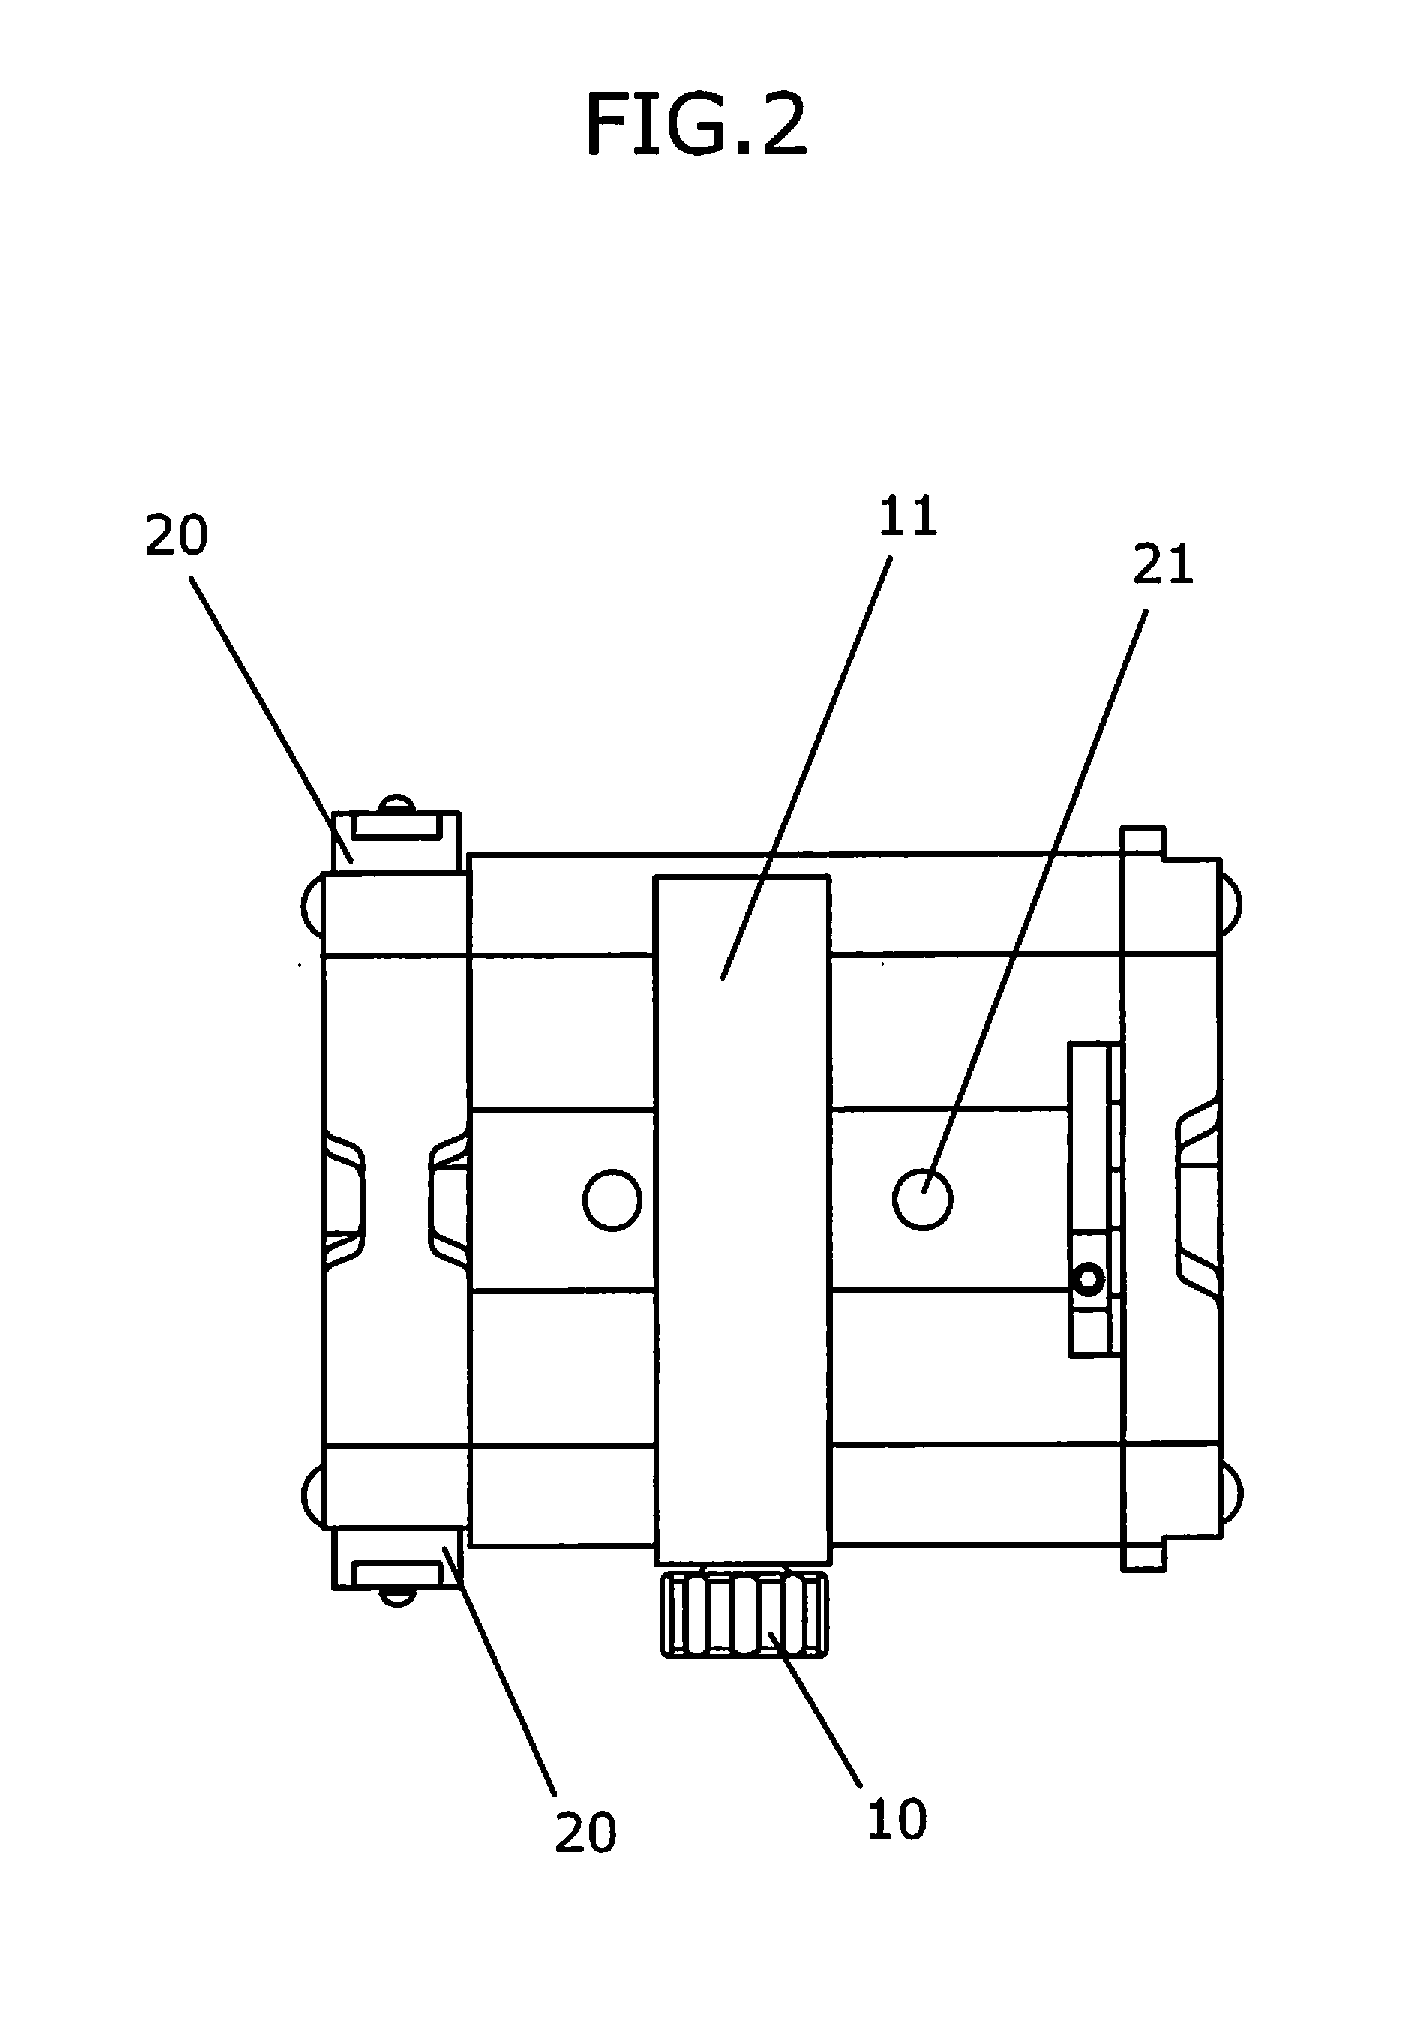 Cradle apparatus for a stepper to hold ultra-sound probe